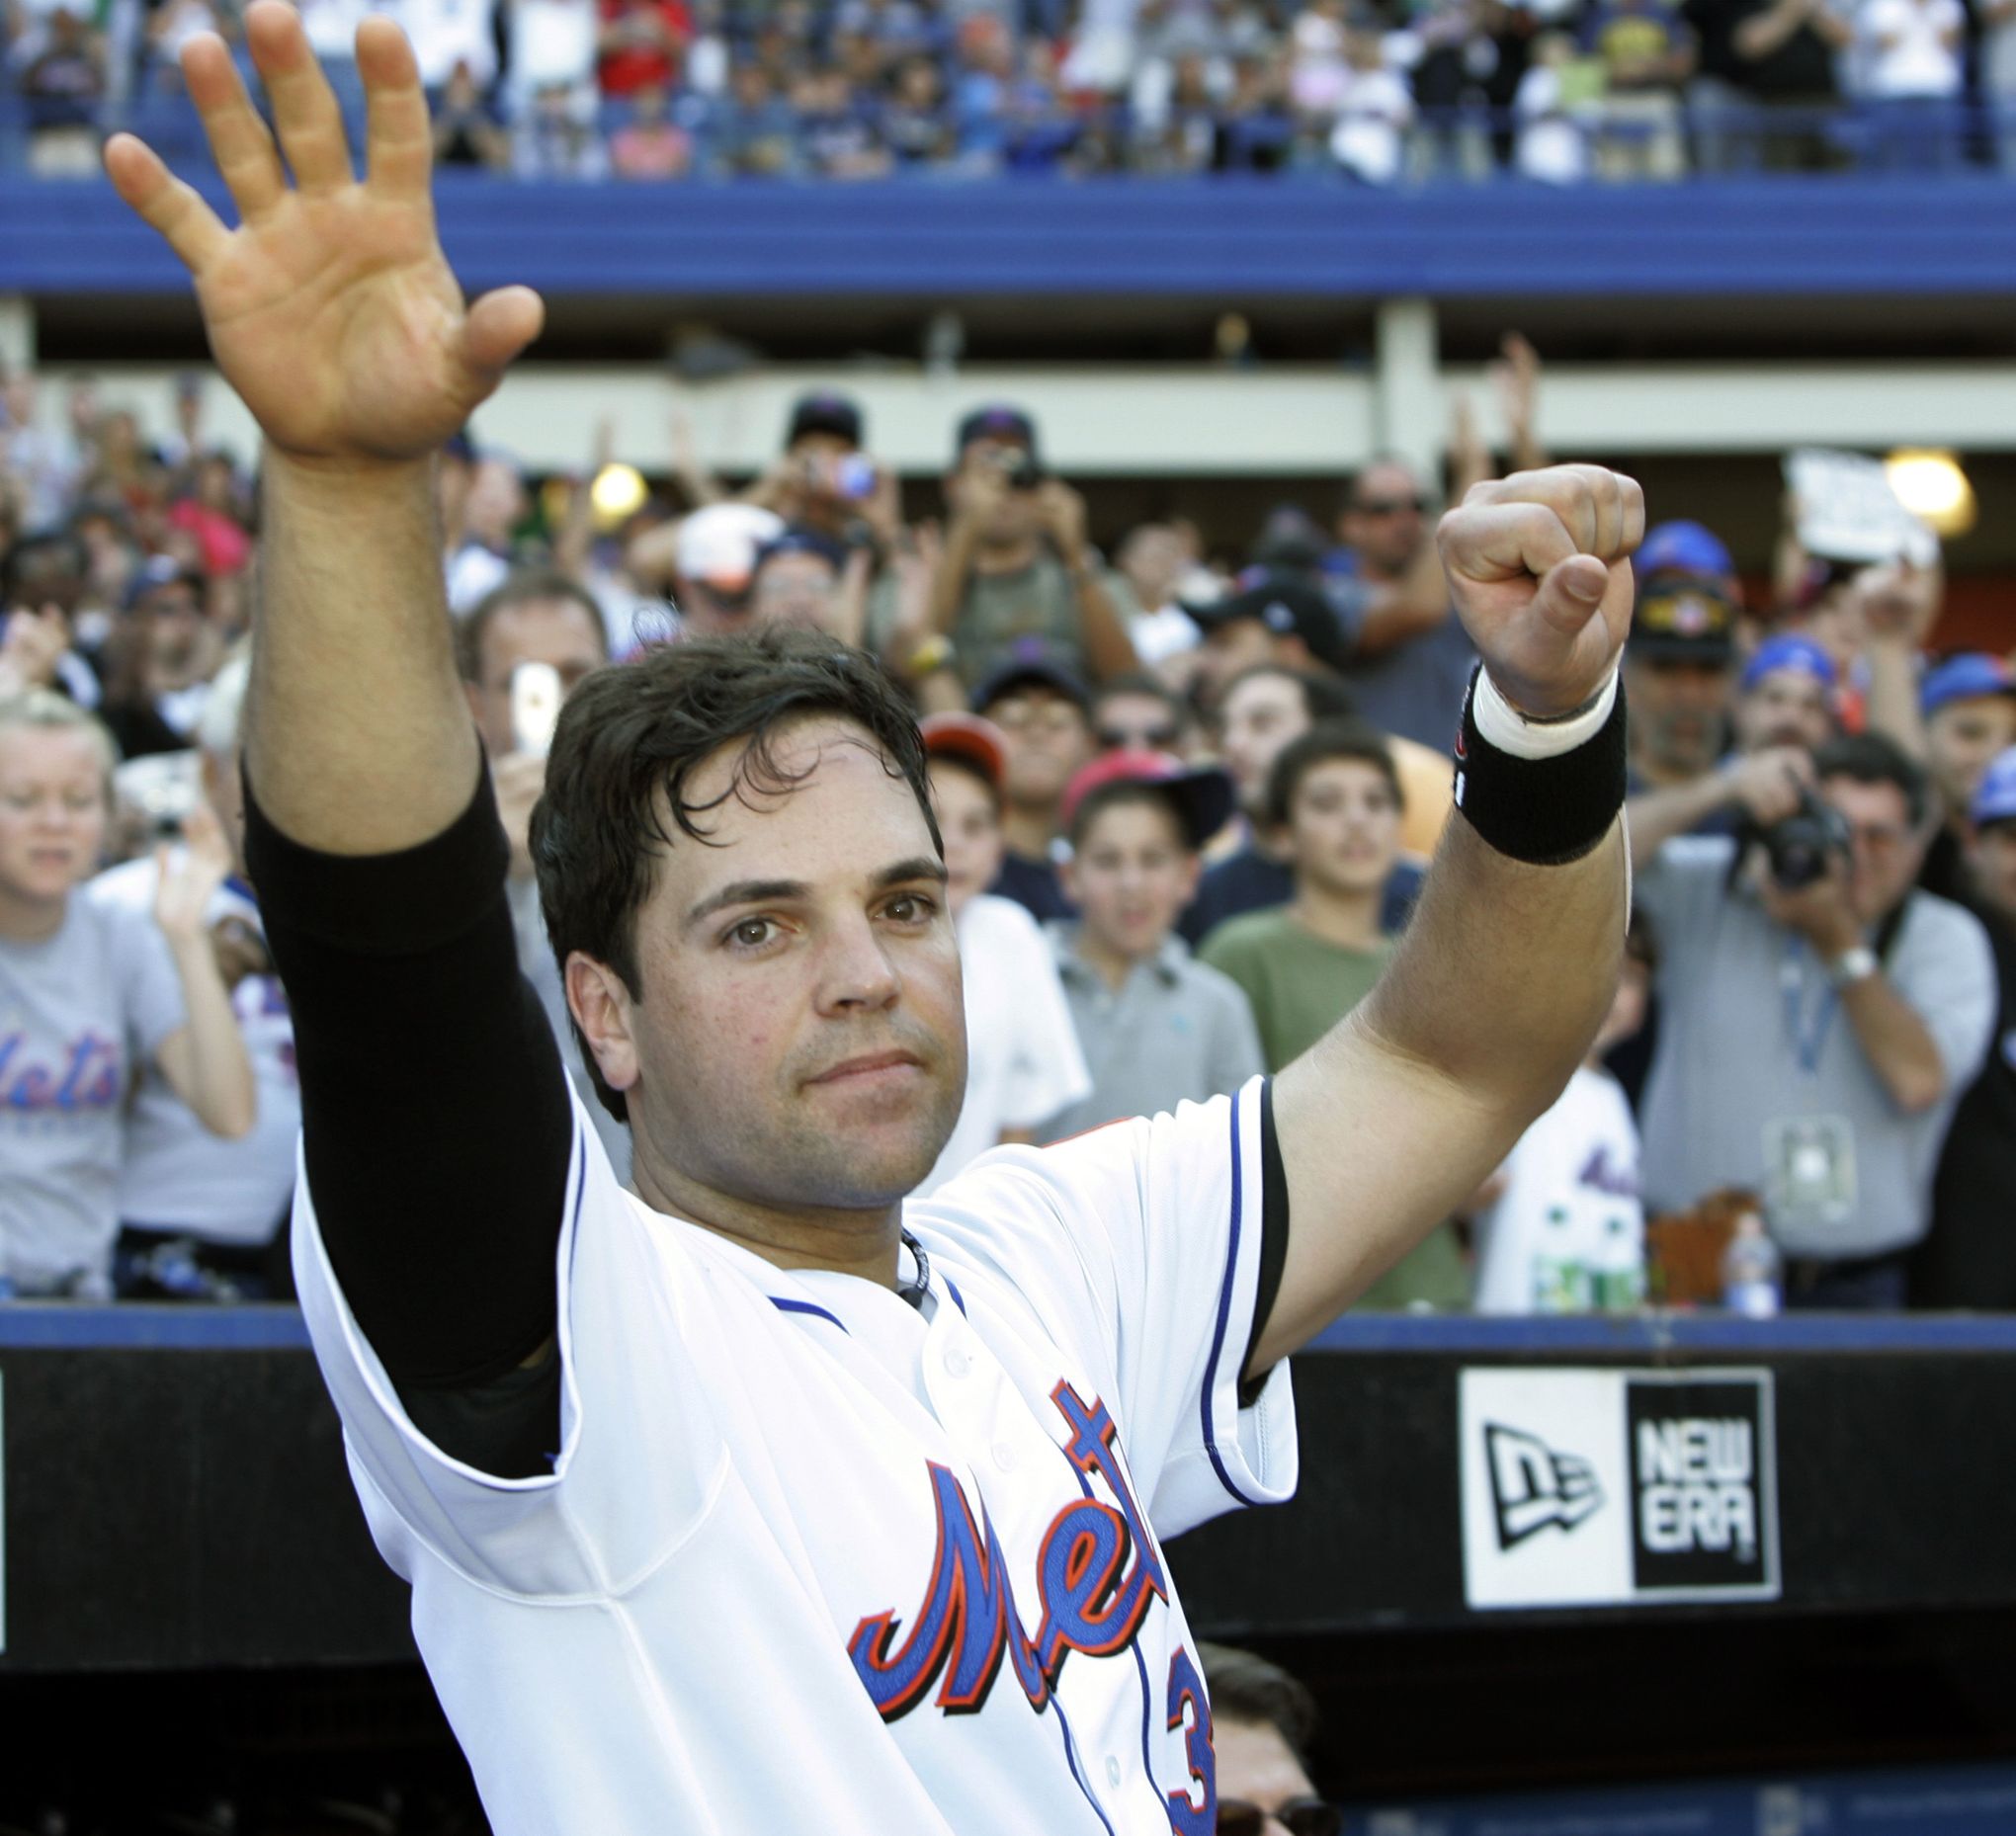 Mike Piazza: Mets Hall of Famer by the numbers – New York Daily News